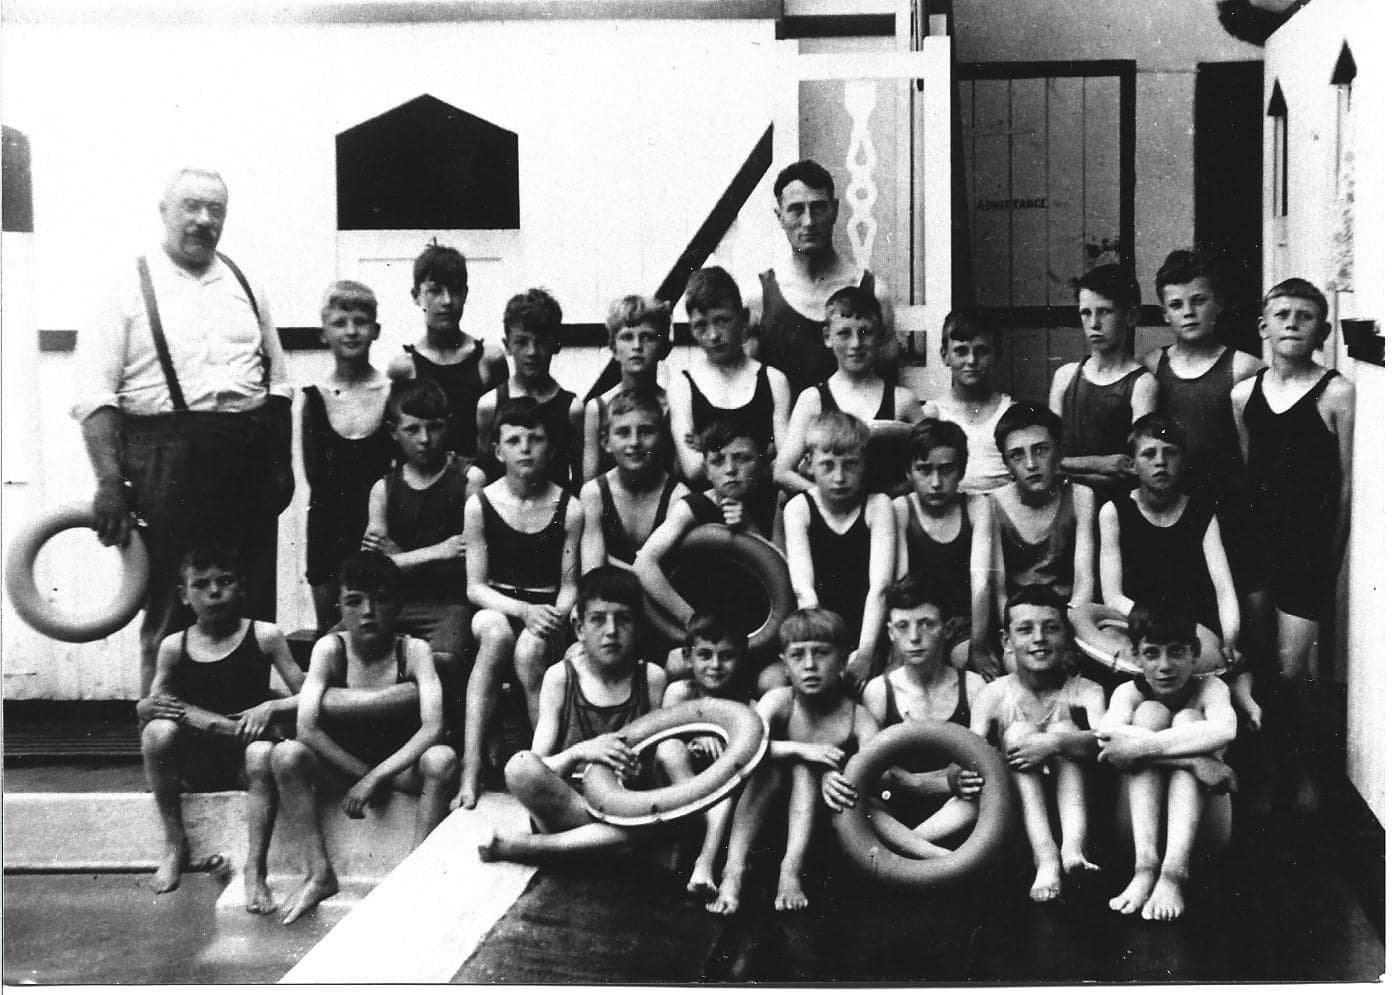 Black and white group photo of children at swimming baths